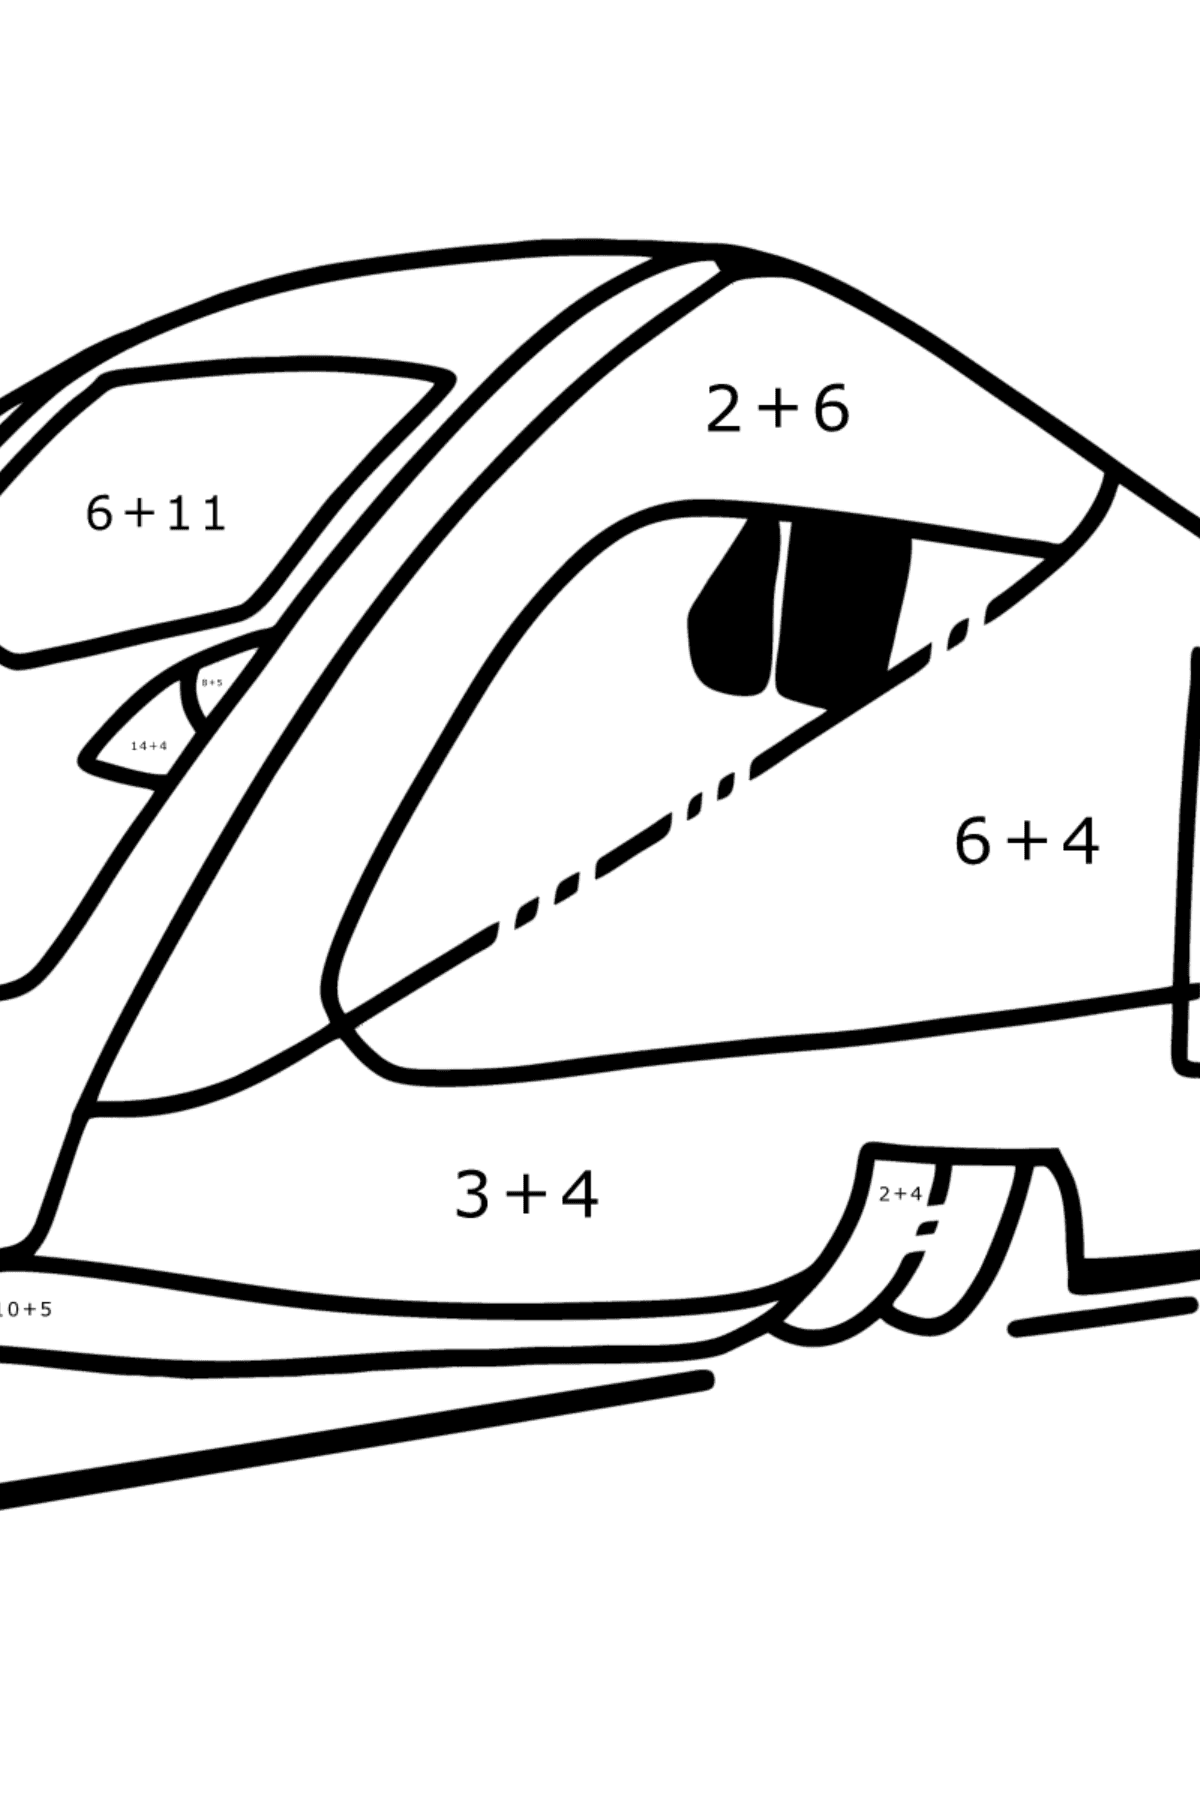 Train coloring page for children - Math Coloring - Addition for Kids